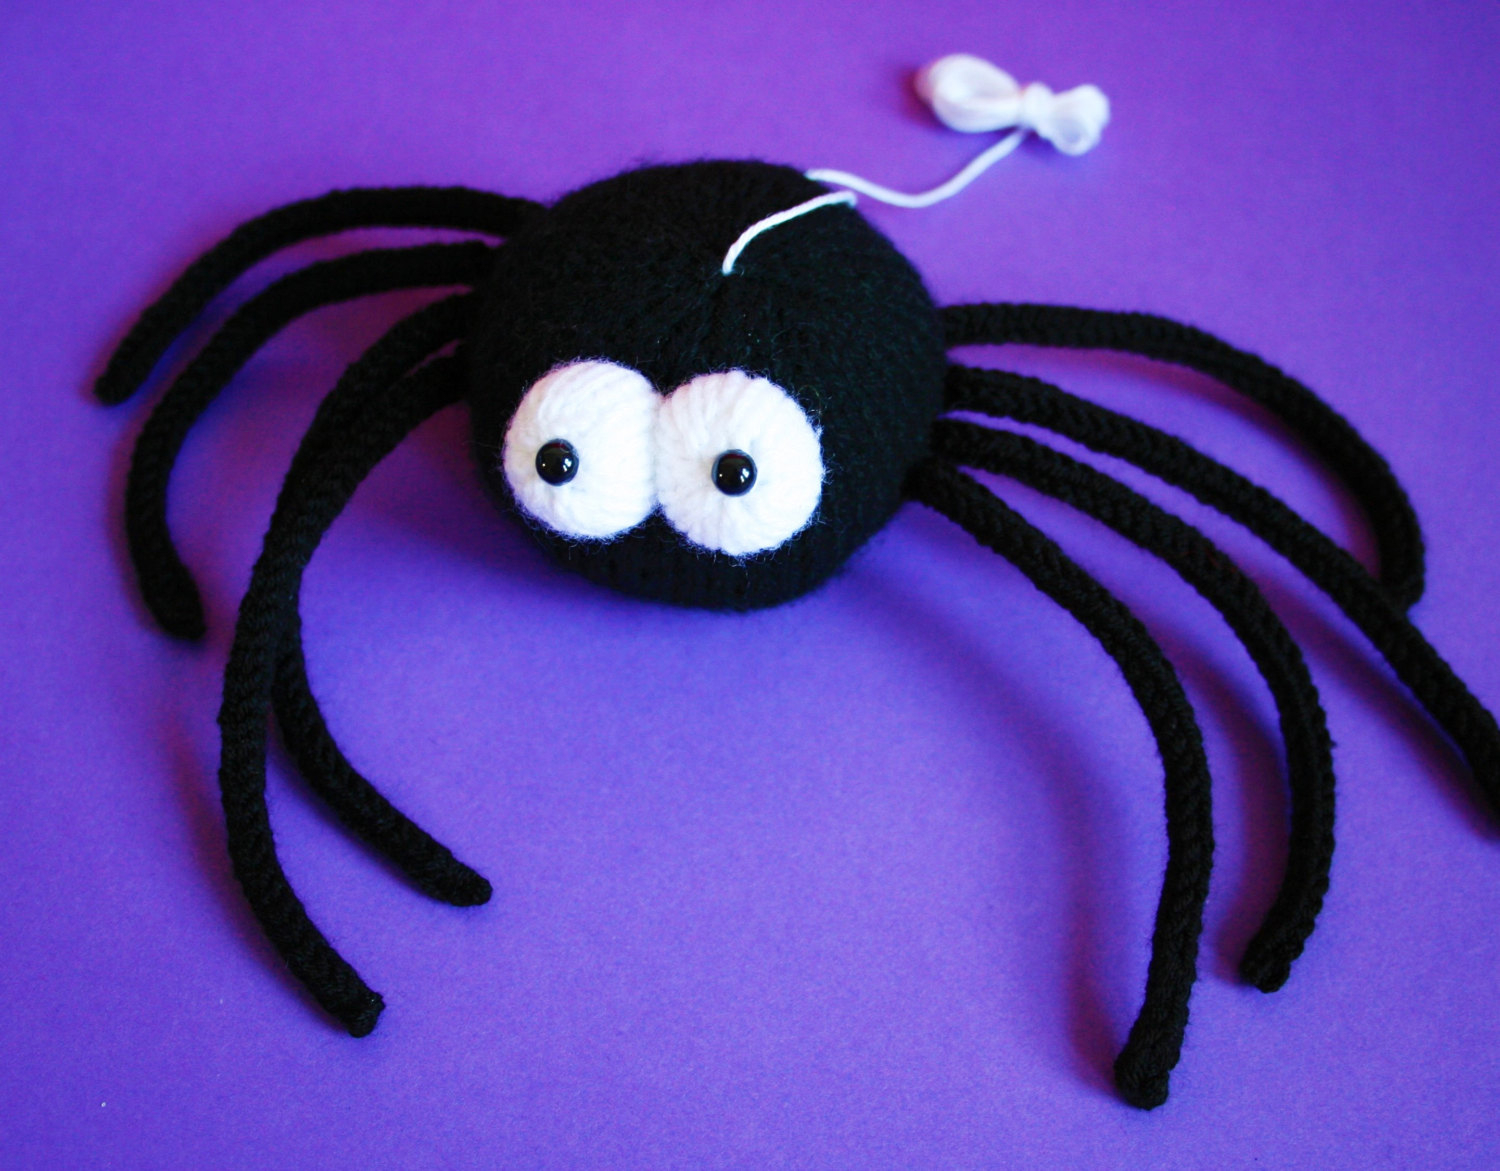 Spider Knitting Pattern Knit Your Own Spooky Spider Pdf Knitting Pattern